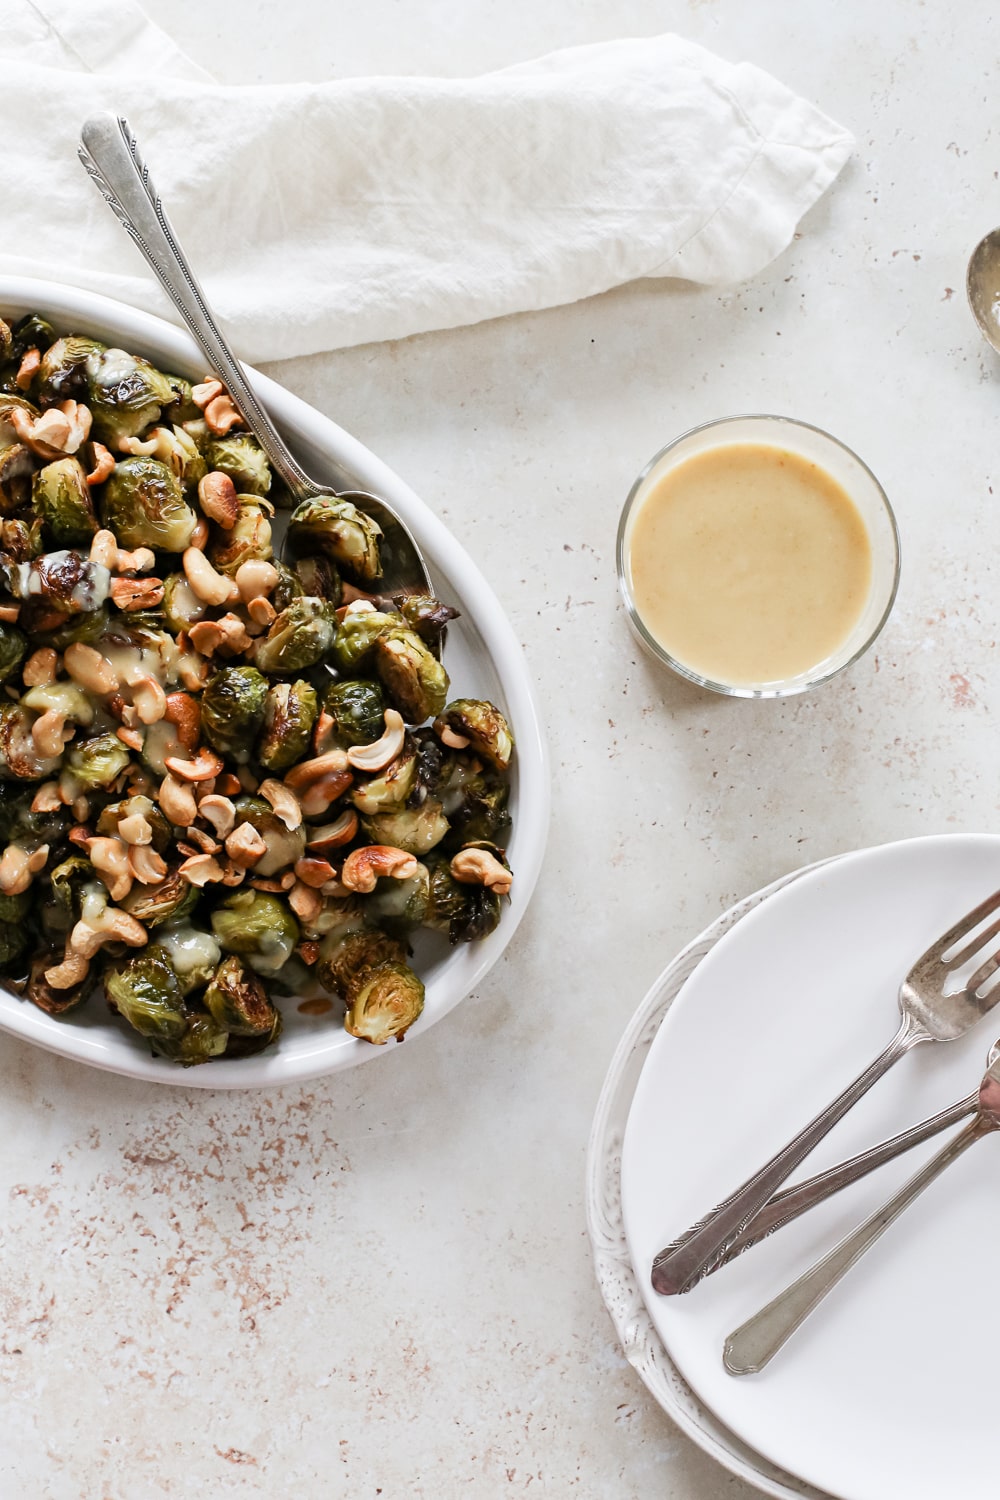 Serving plate with Asian Brussels sprouts drizzled with a creamy lemon miso dressing.